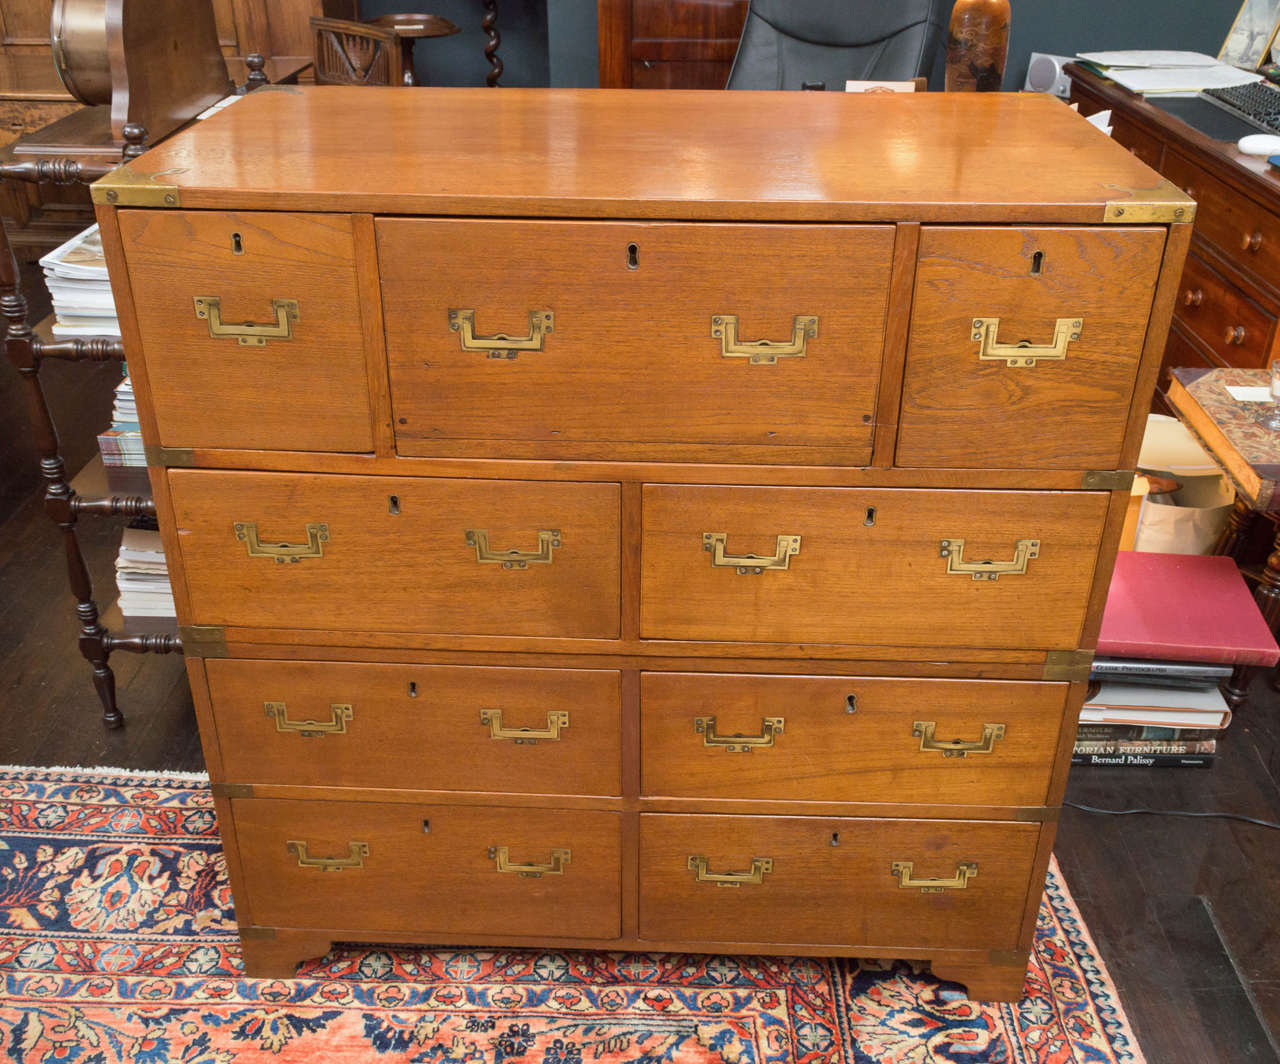 19th century Anglo-Chinese ship captain's desk / chest in two parts. Fitted with a secretary drawer (top row, middle drawer) and two small drawers with cubby holes. Five drawers on top and four drawers on bottom. Small scale drawers for compact